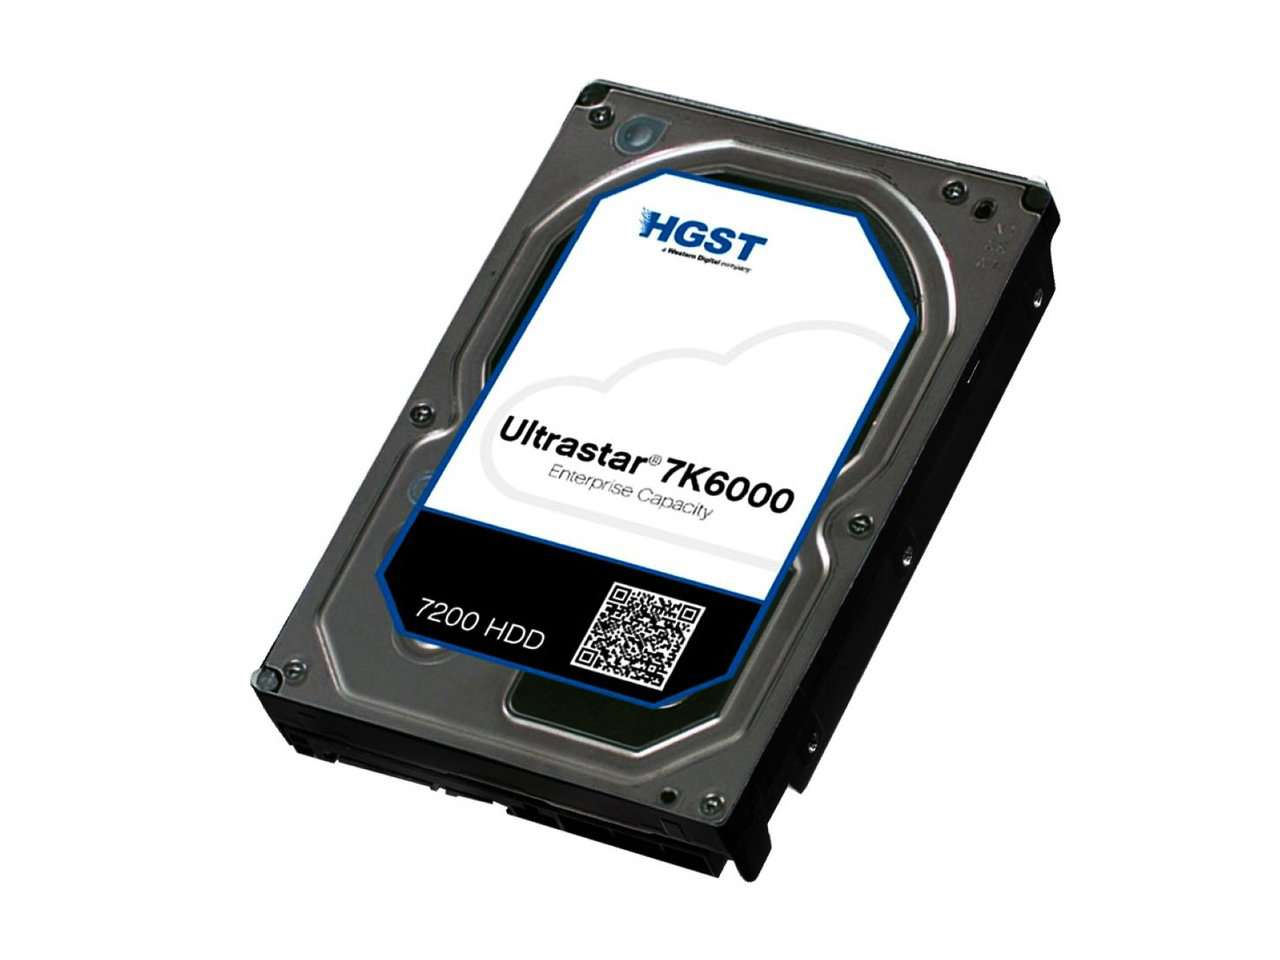 HGST Ultrastar 7K6000 0F22821  HUS726060AL5215 6TB 7.2K RPM SAS 12Gb/s 512e 128MB Cache 3.5" TCG FIPS HDD